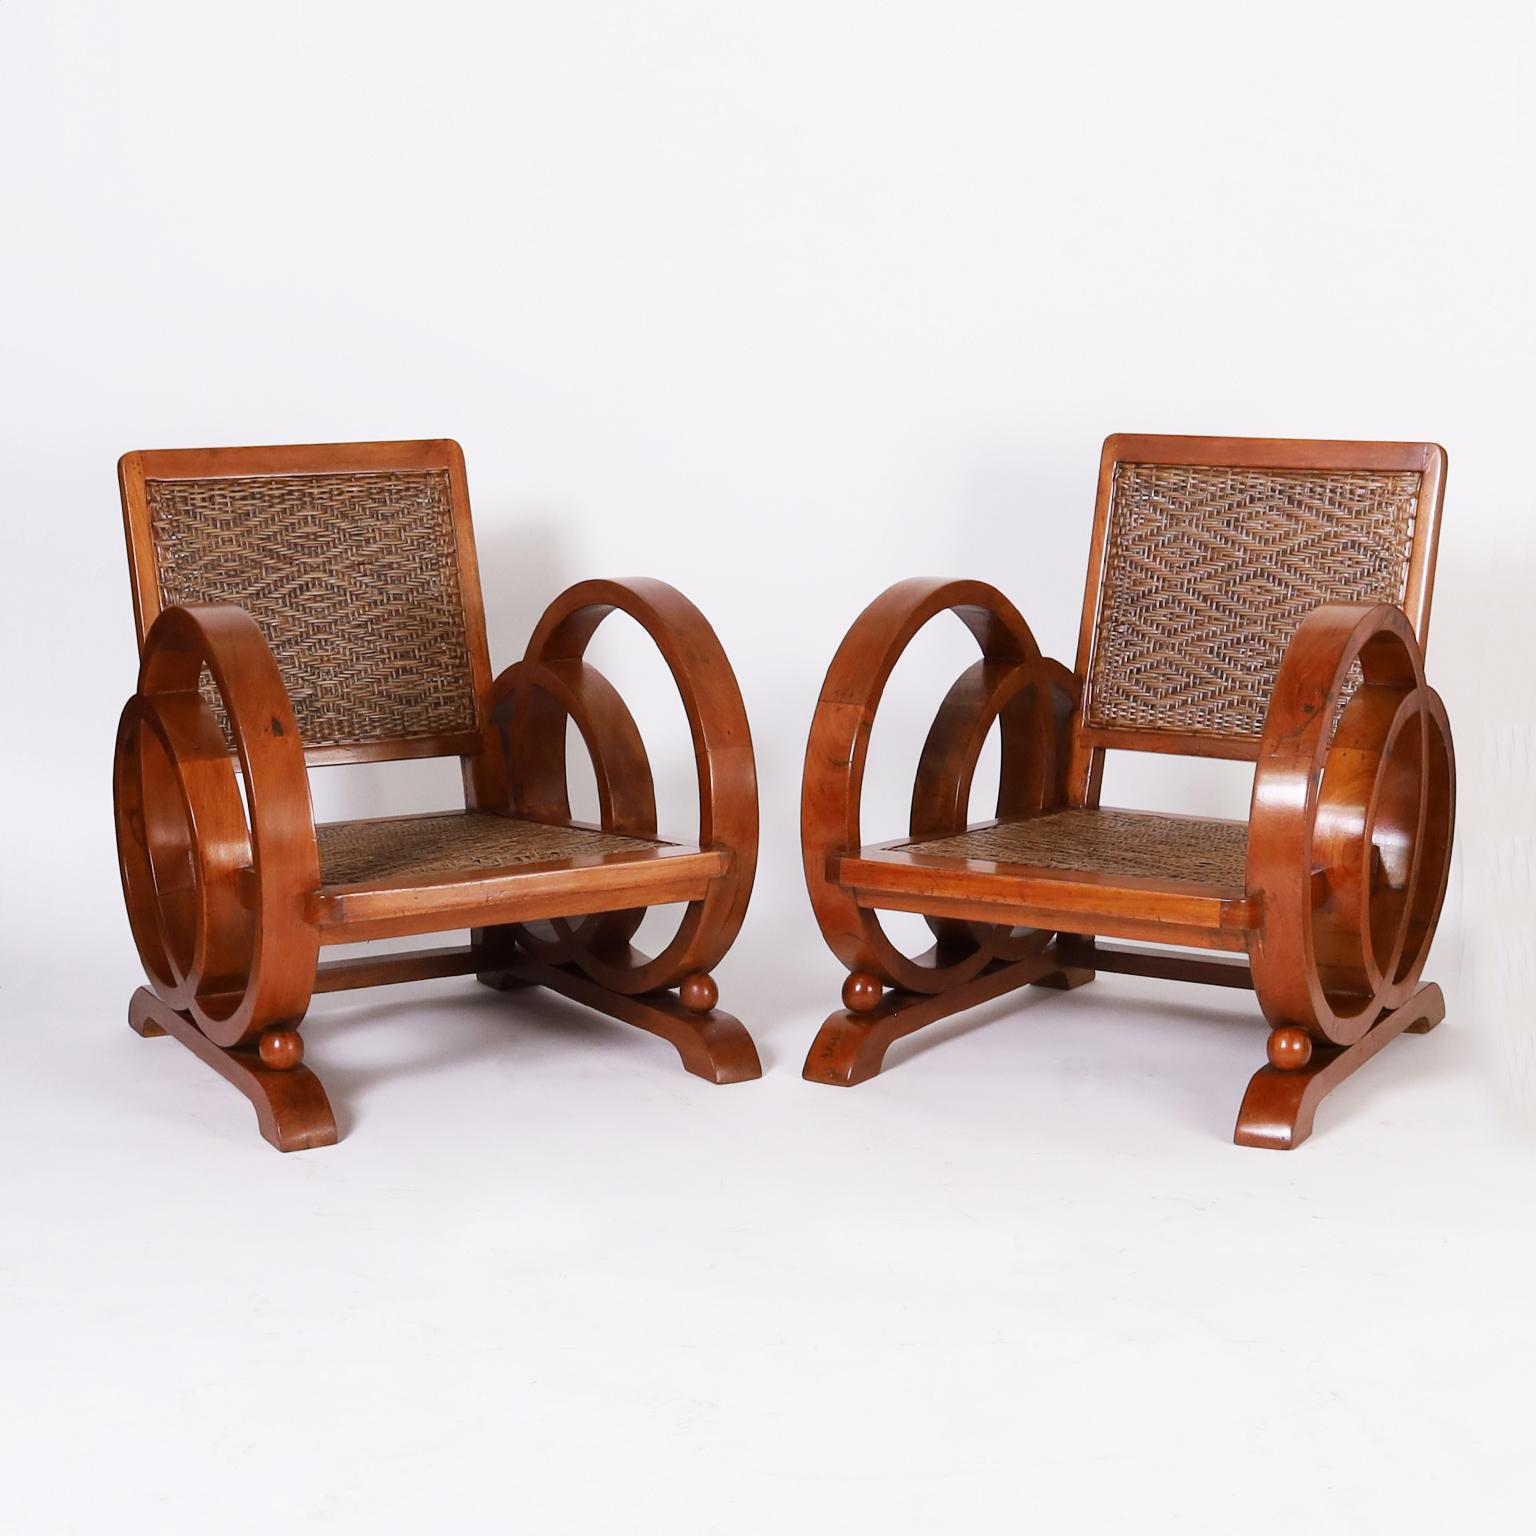 British Colonial Art Deco Style Caribbean Three Piece Settee and Two Chair Suite of Furniture For Sale